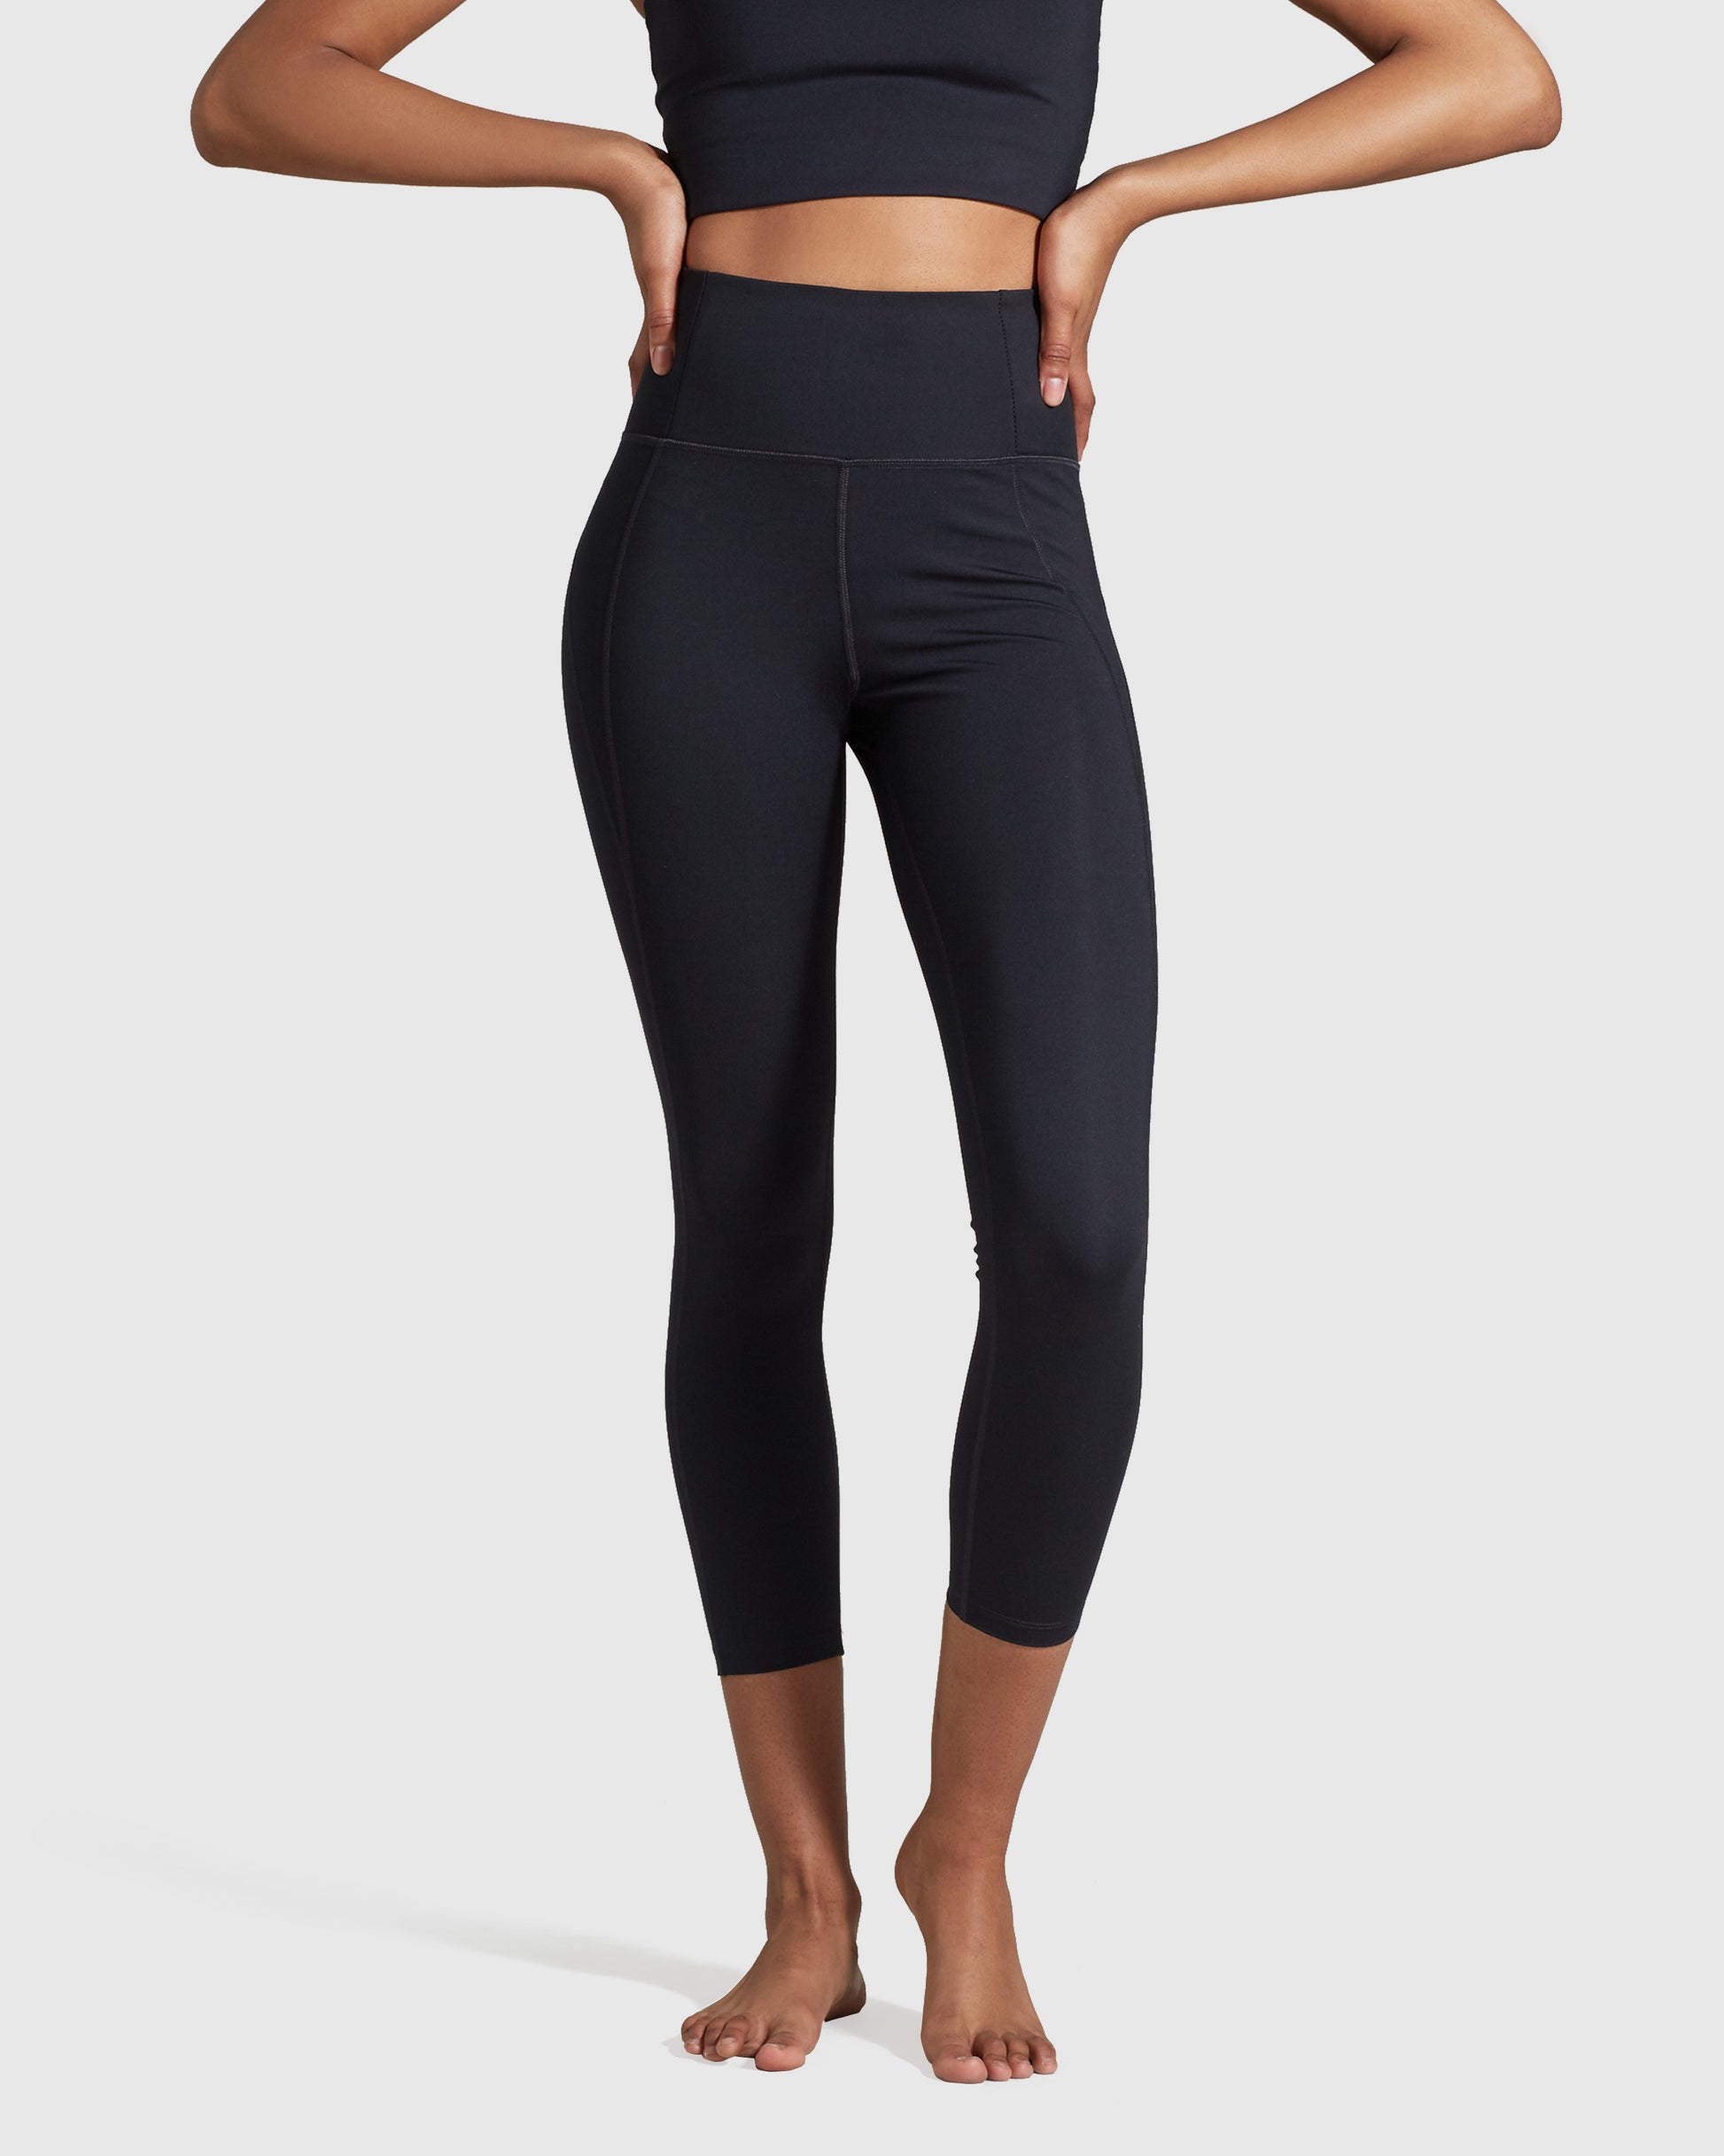 Gatherings Collective // Lace Waistband Leggings - X-Small